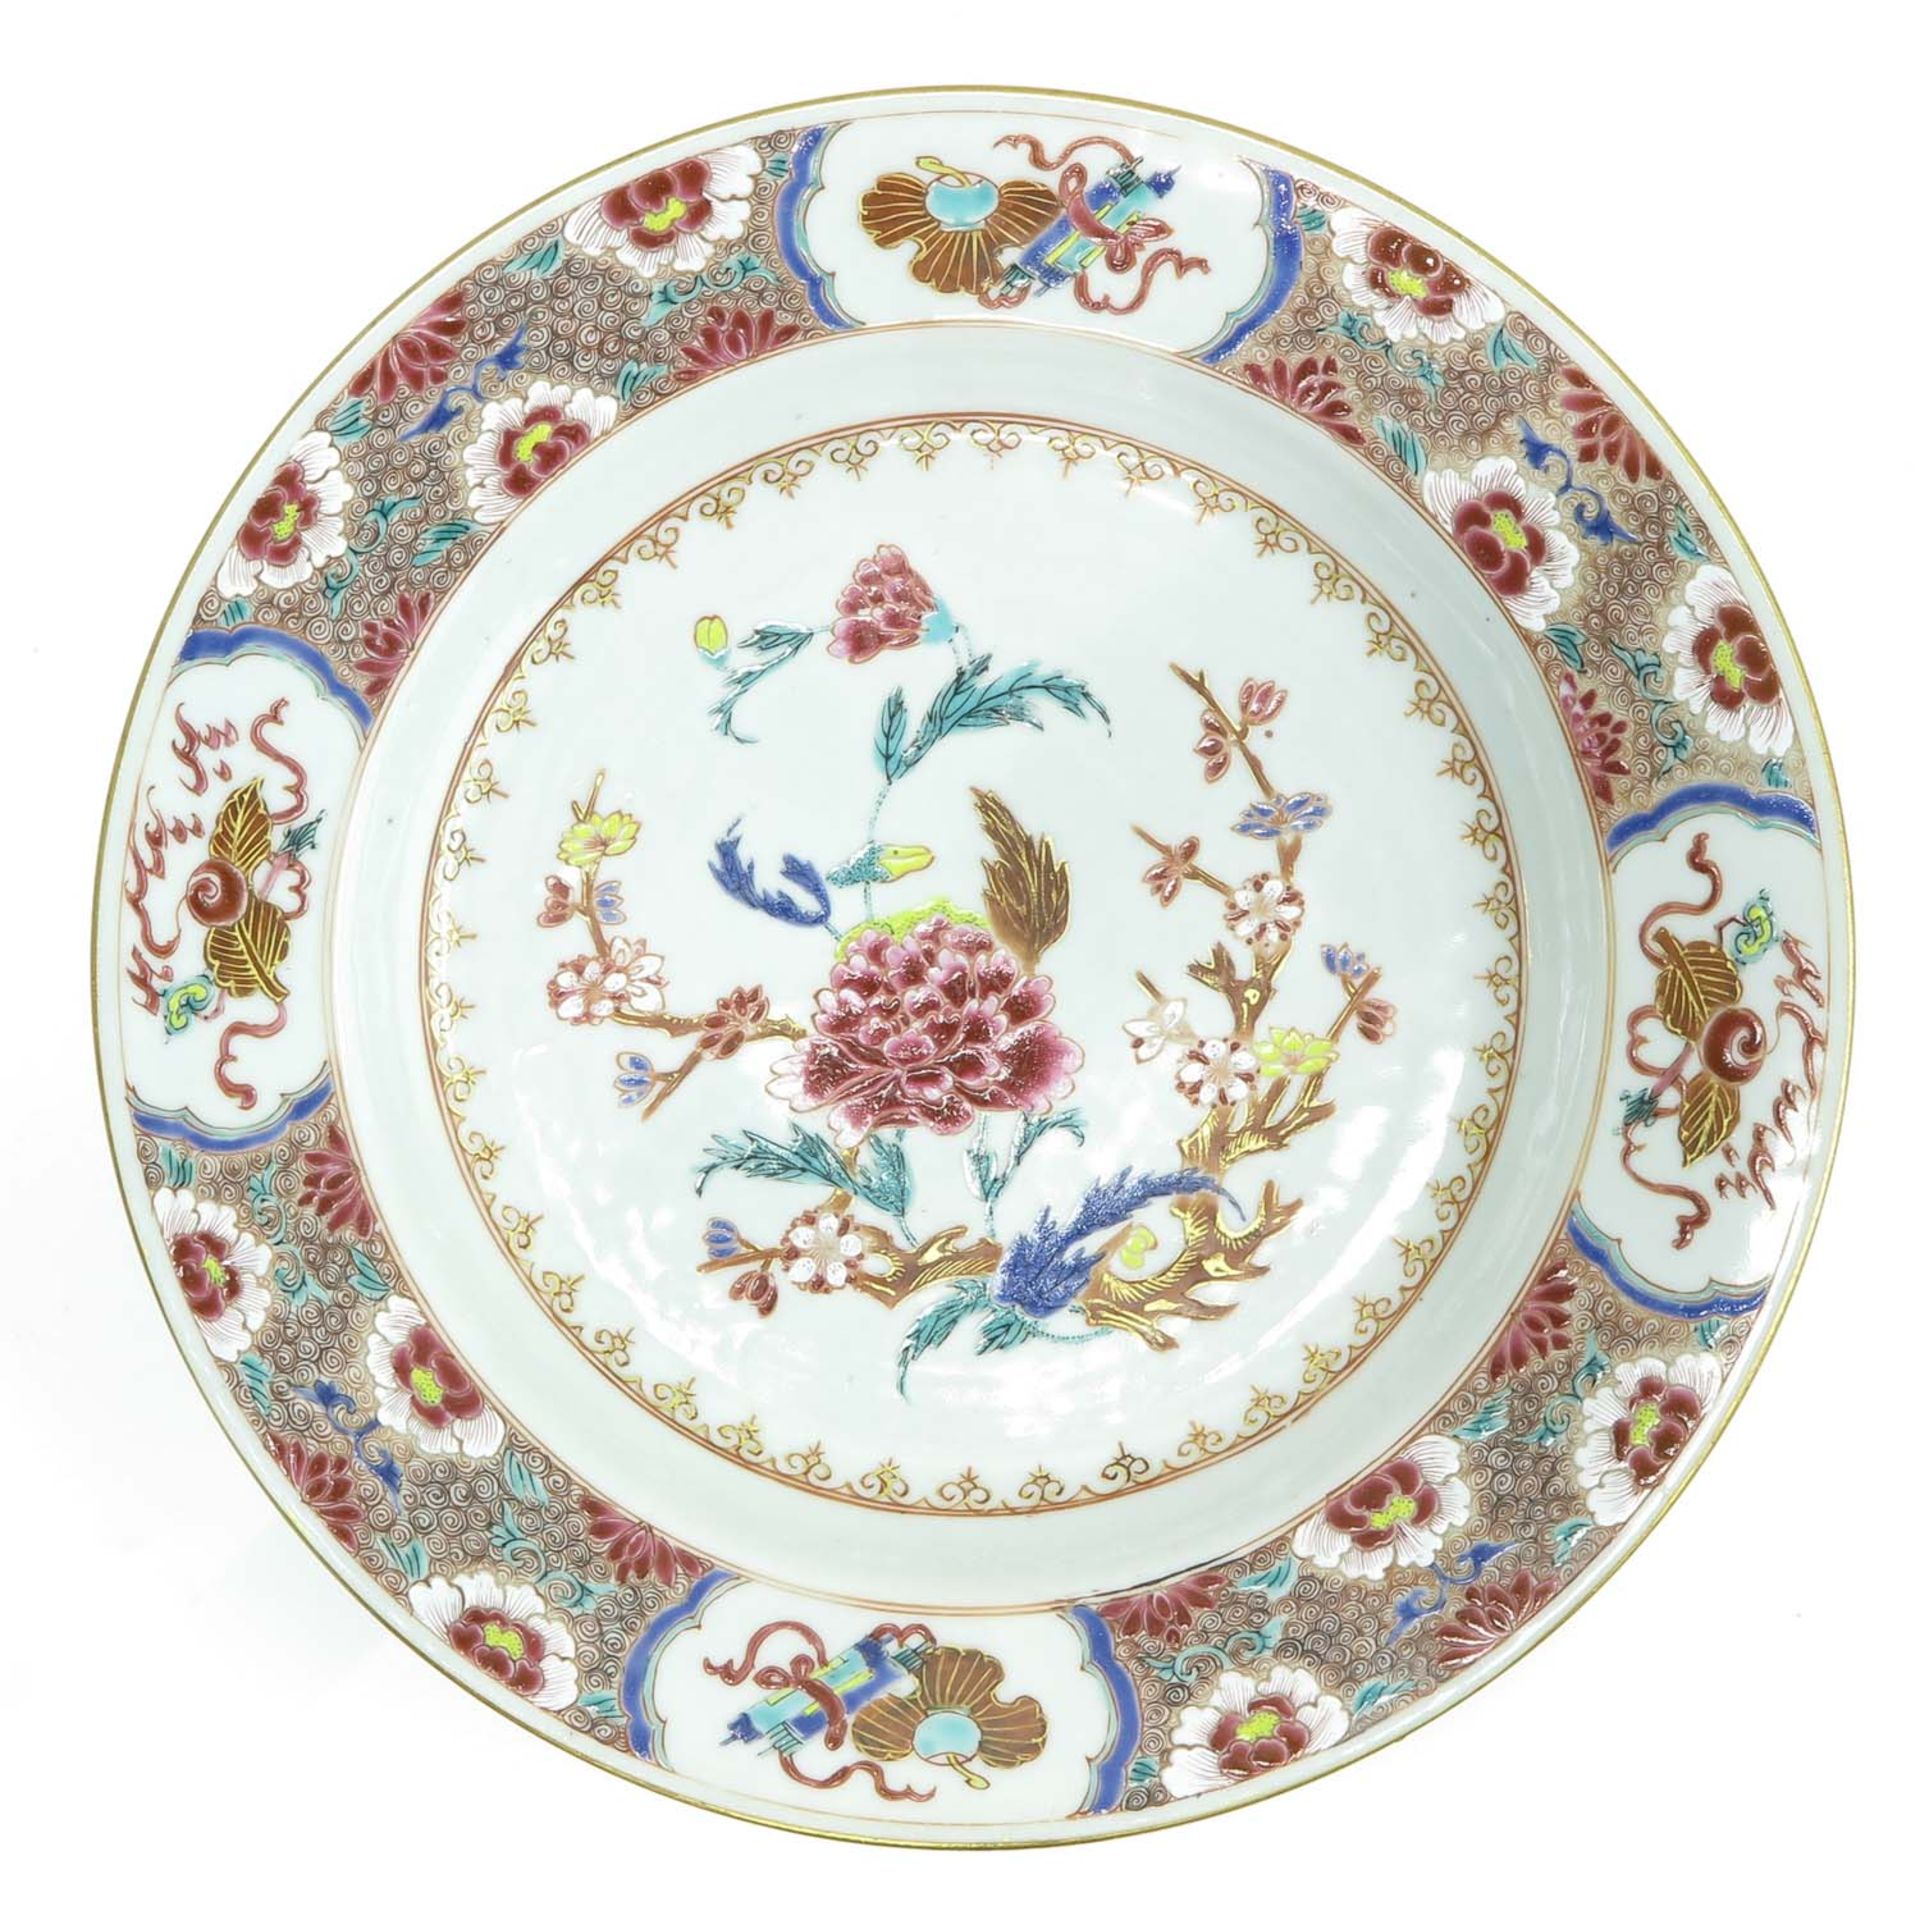 18th Century China Porcelain Famille Rose Plate